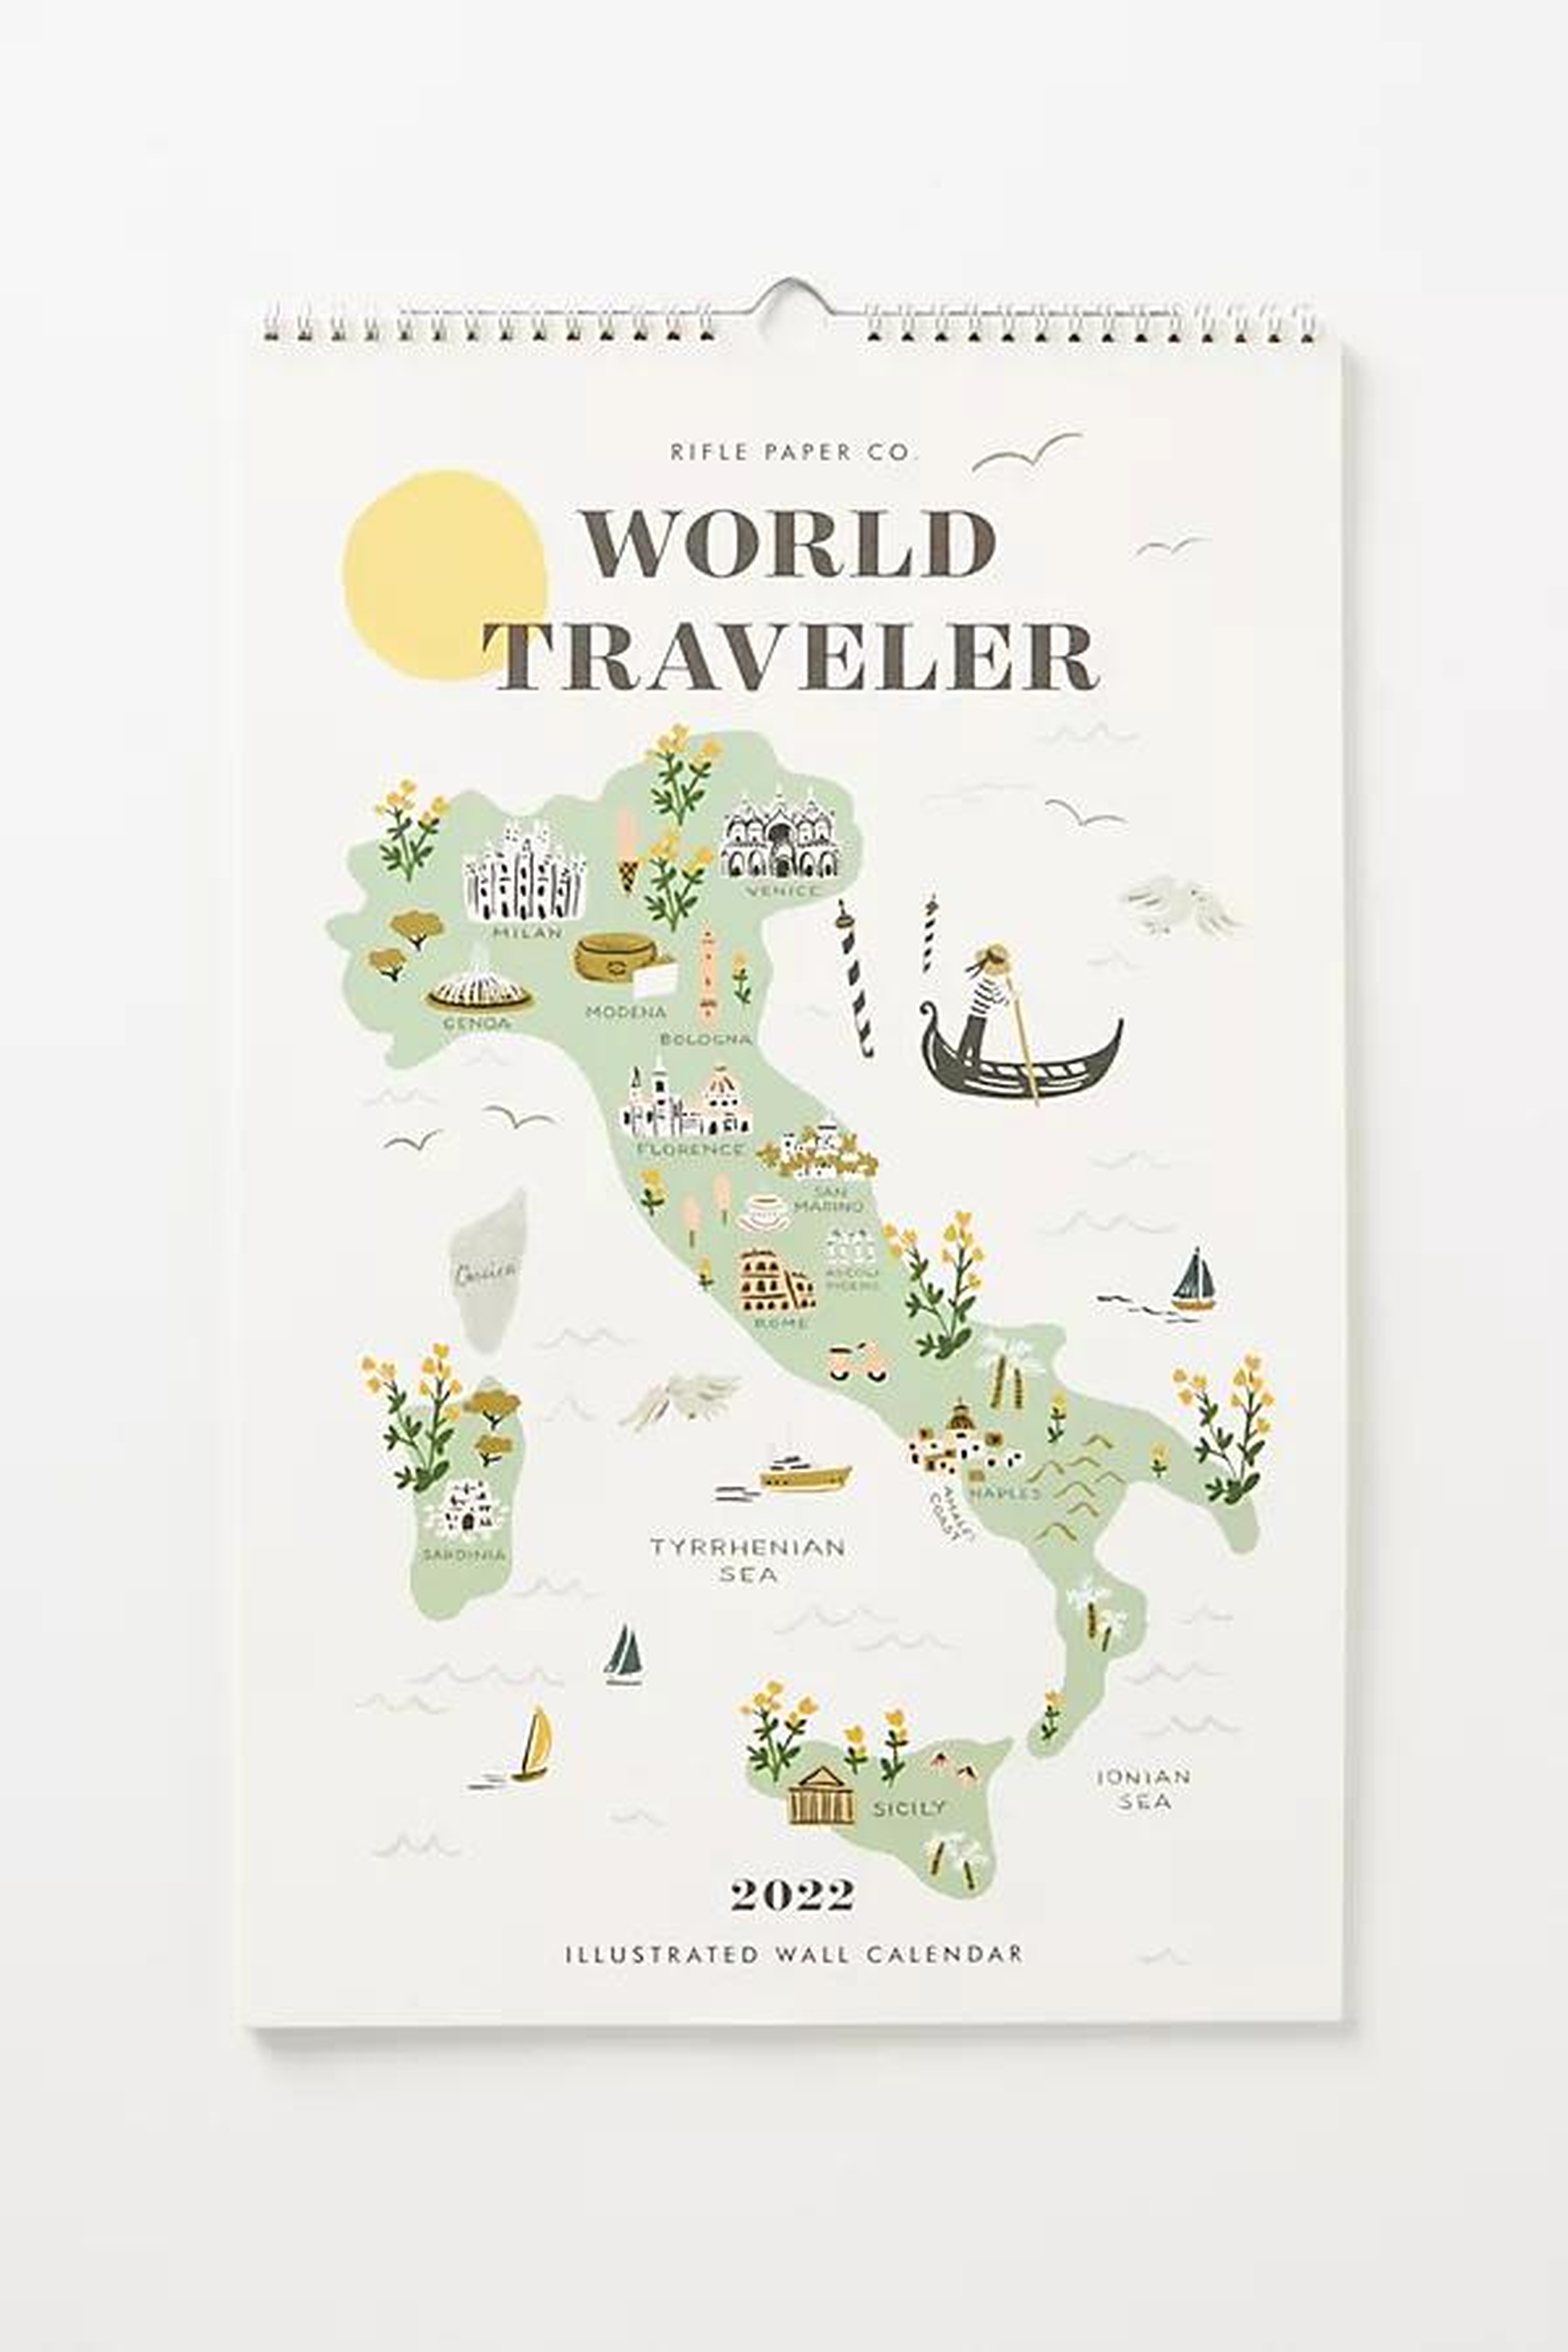 Rifle Paper Co. World Traveler 2022 Wall Calendar By Rifle Paper Co. in White - Anthropologie